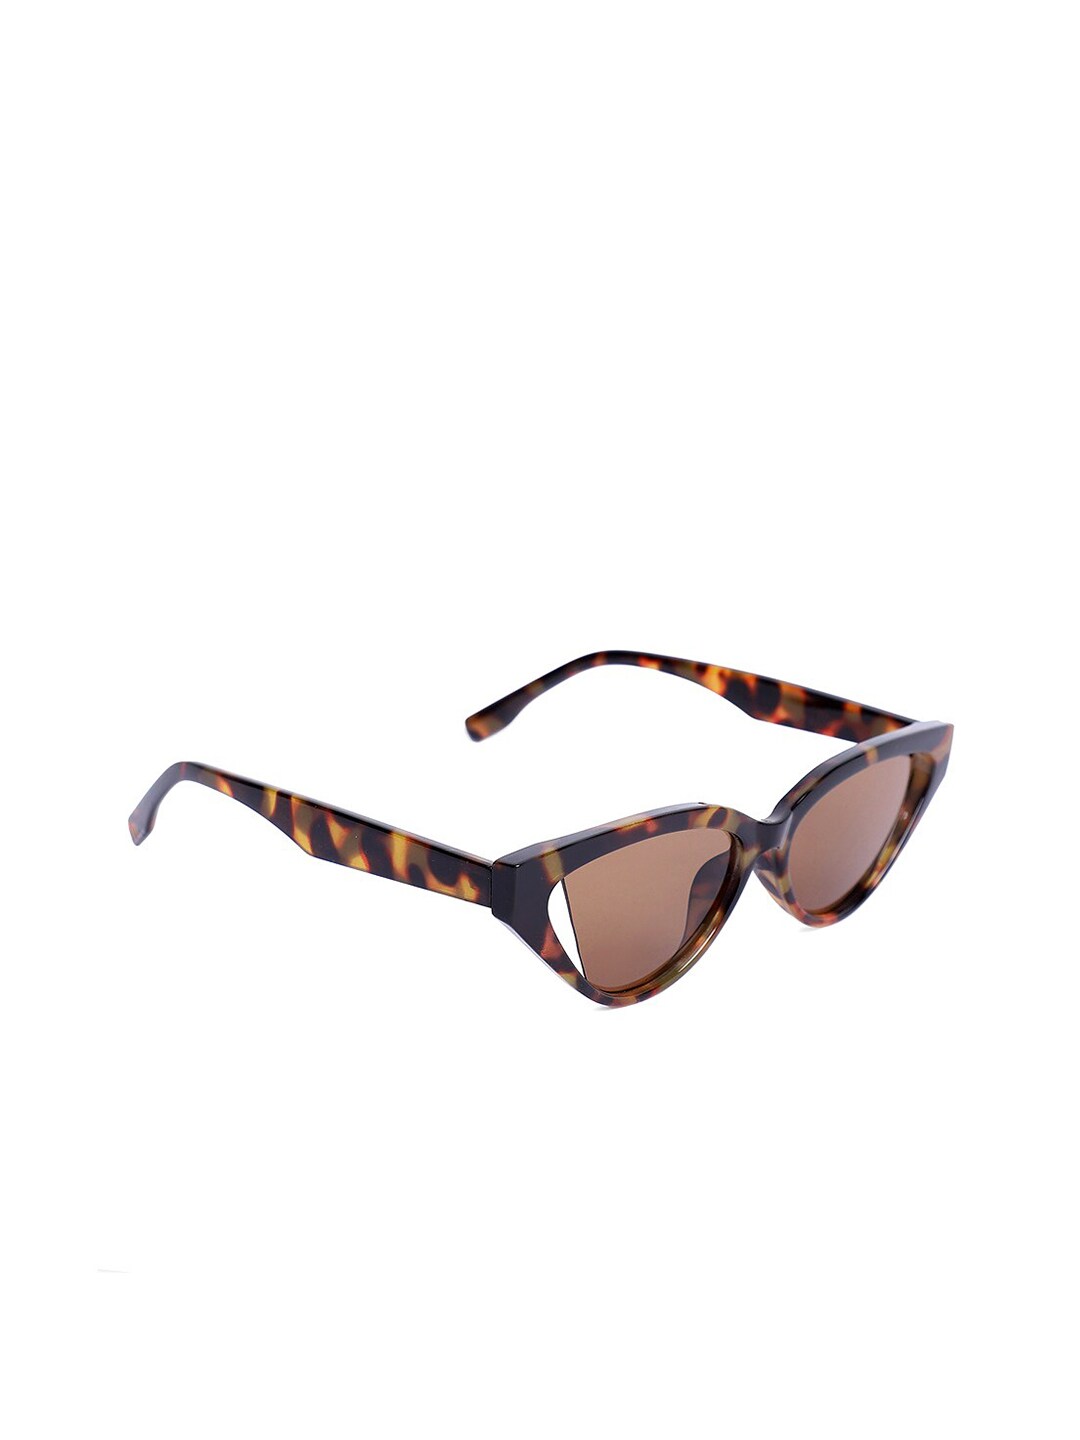 FUZOKU Unisex Brown Lens & Brown Cateye Sunglasses with UV Protected Lens